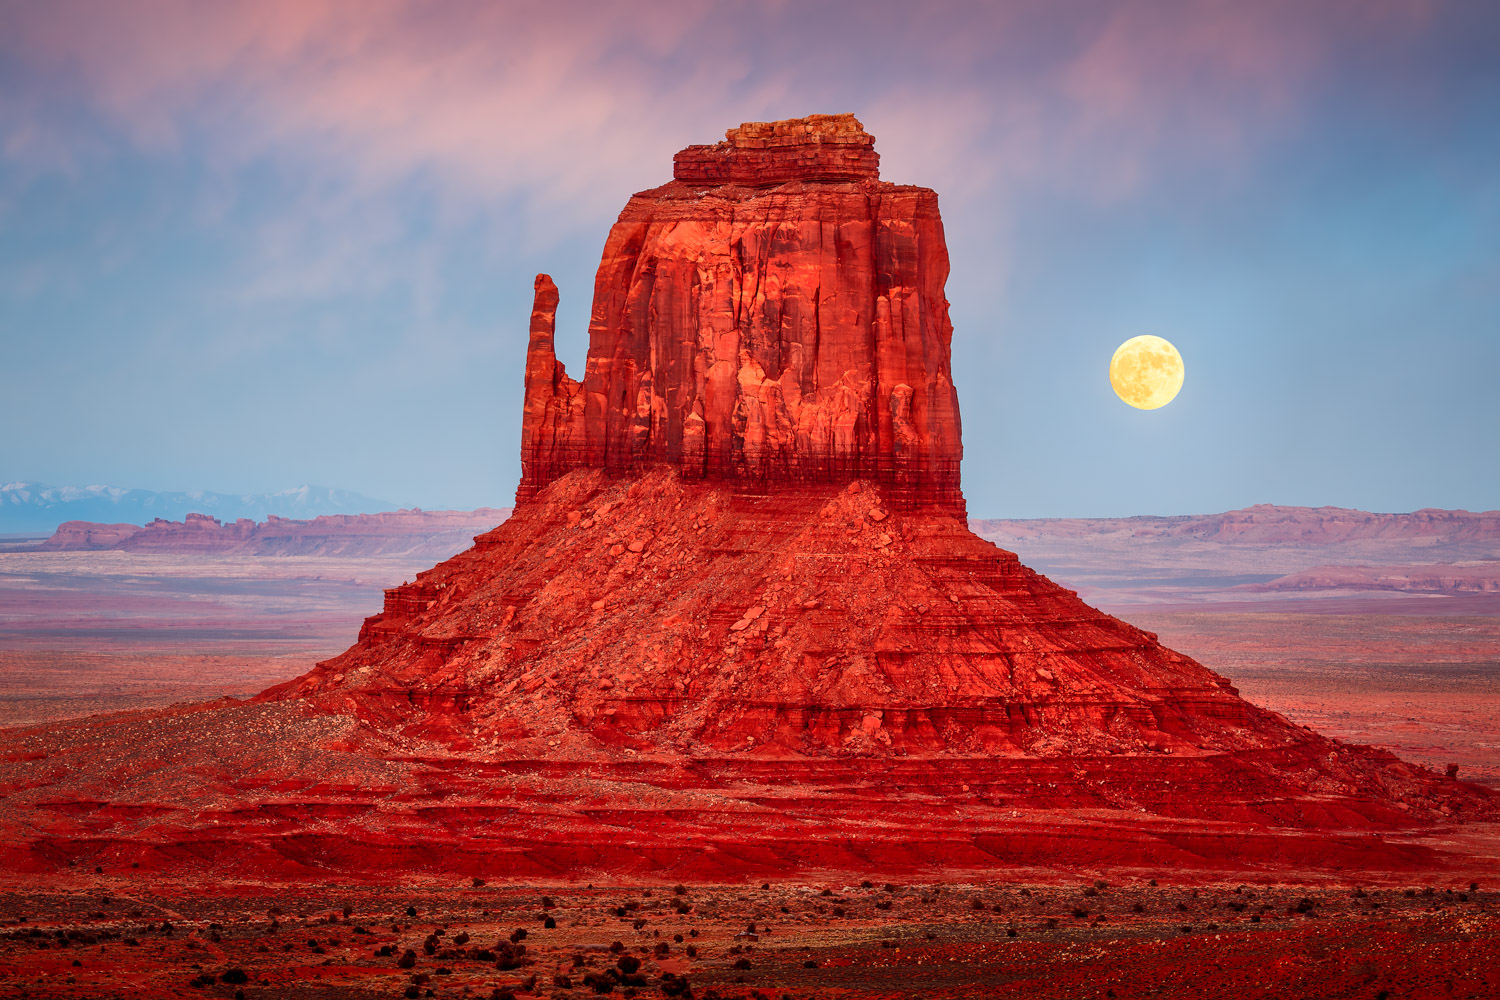 A full moon rising over a red rock butte in the desert of monument valley Arizona.